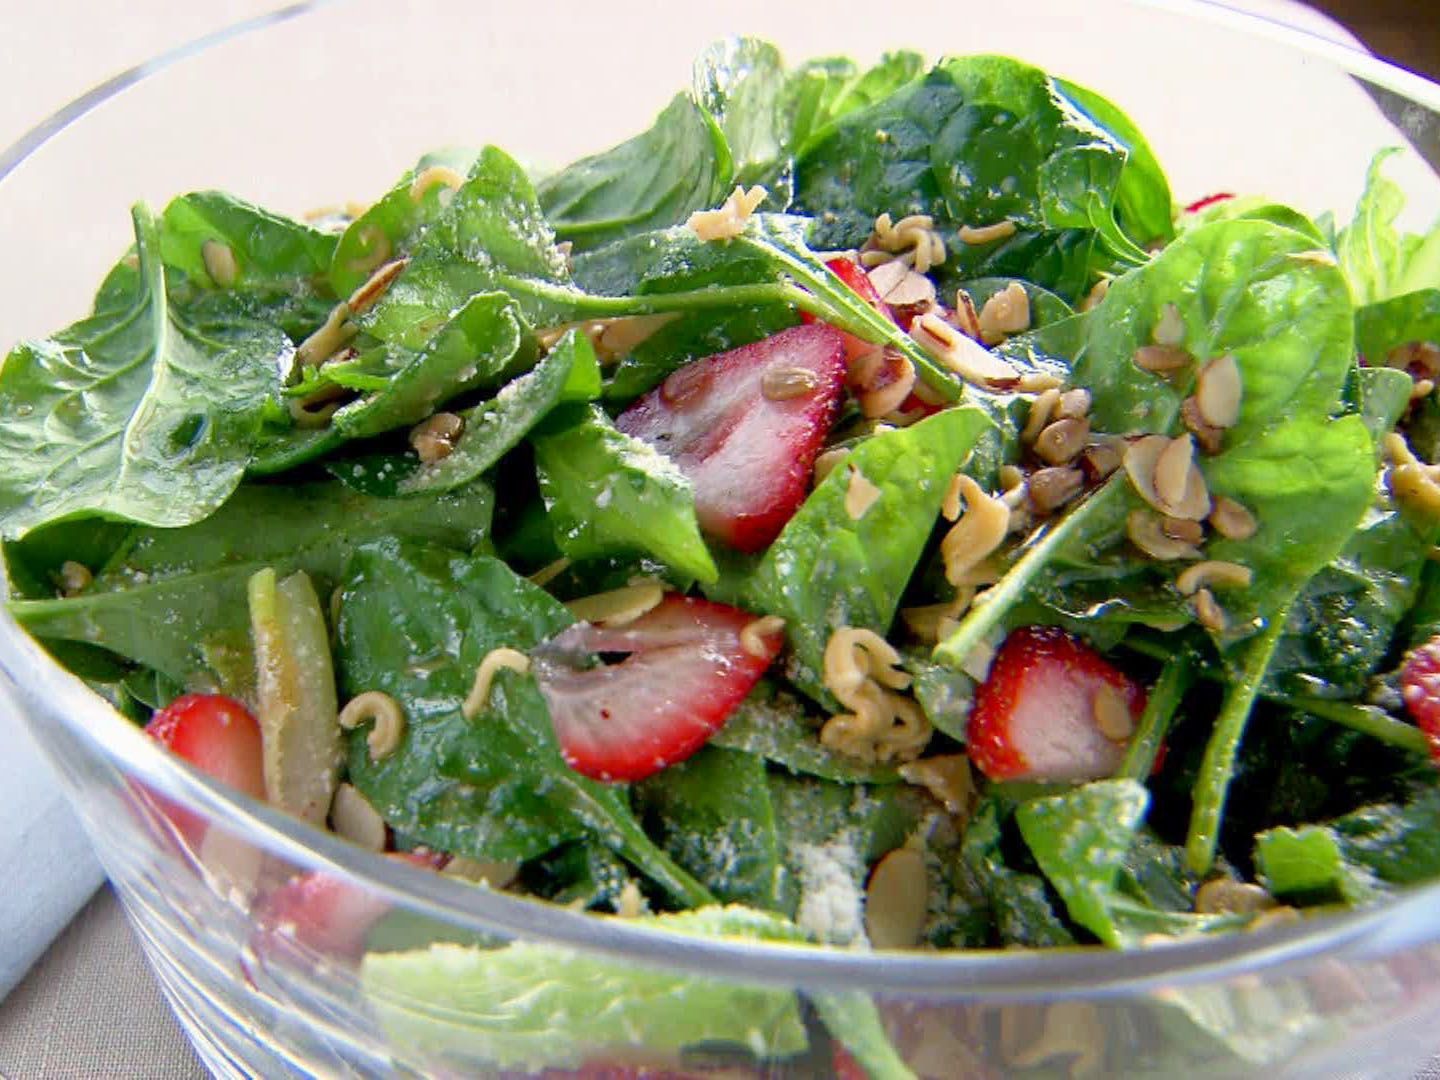 Strawberry Salad with crunchy topping and vinaigrette dressing